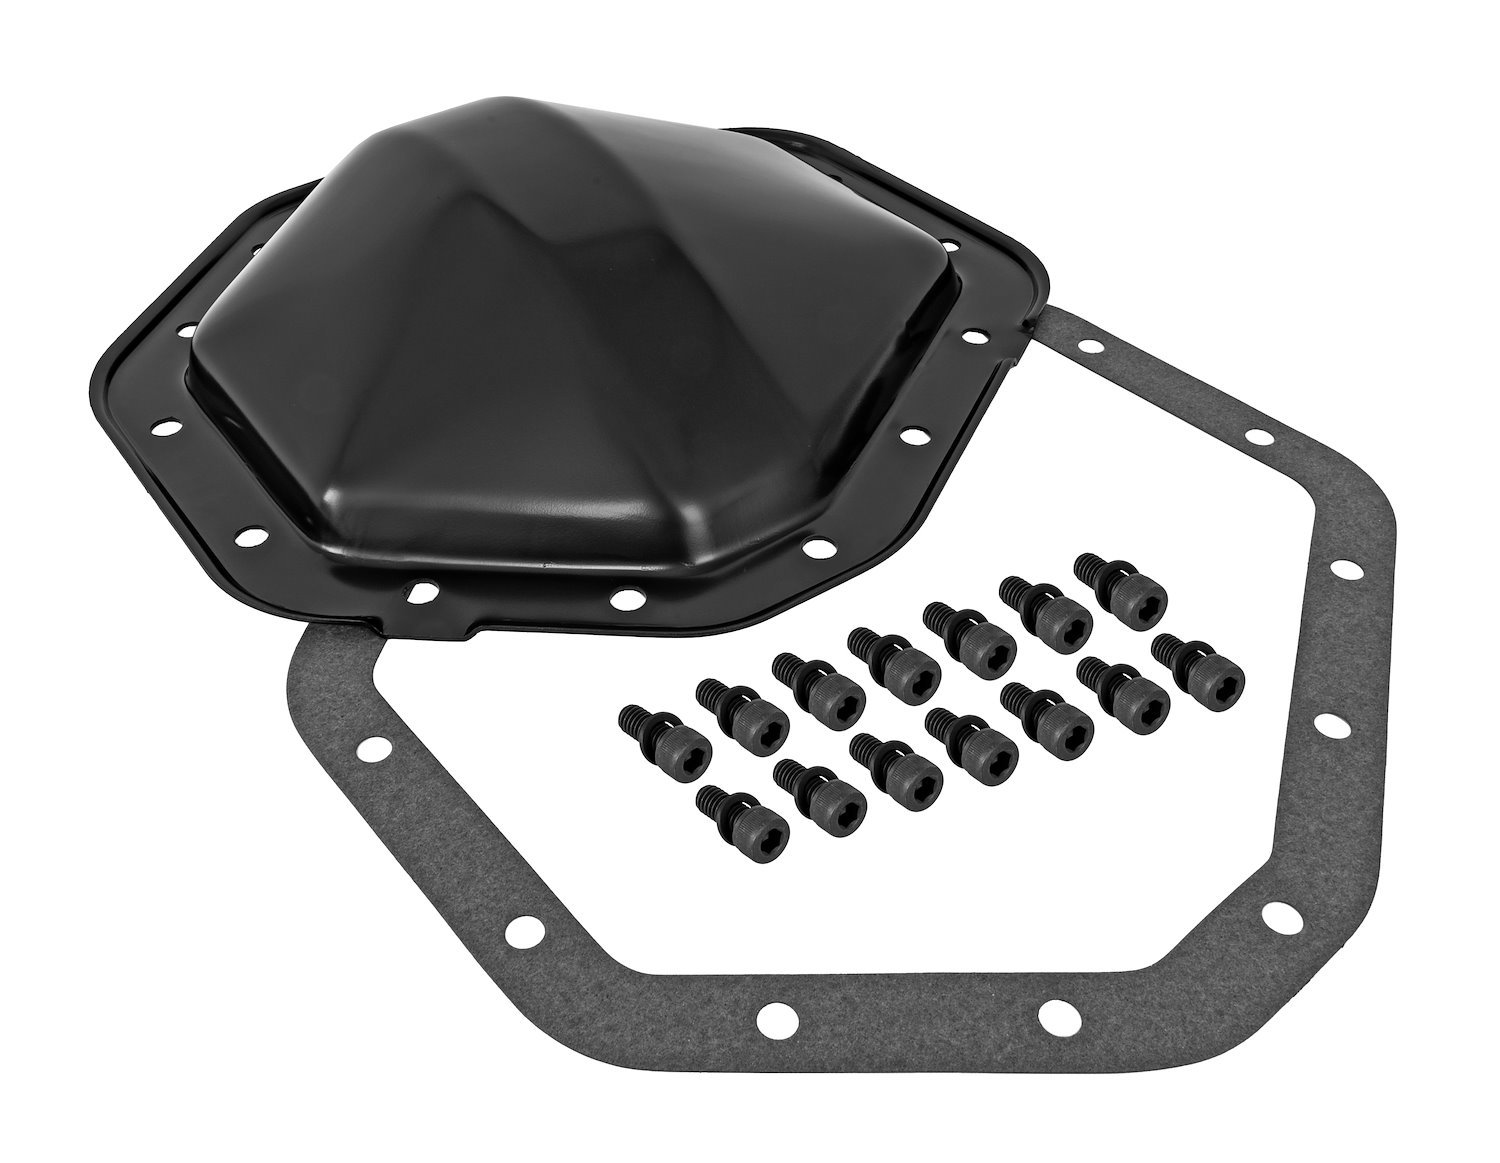 Steel Differential Cover Fits Select 1967-2015 GM Trucks w/10.5 in. Dia. Ring Gear & 14-Bolt Cover